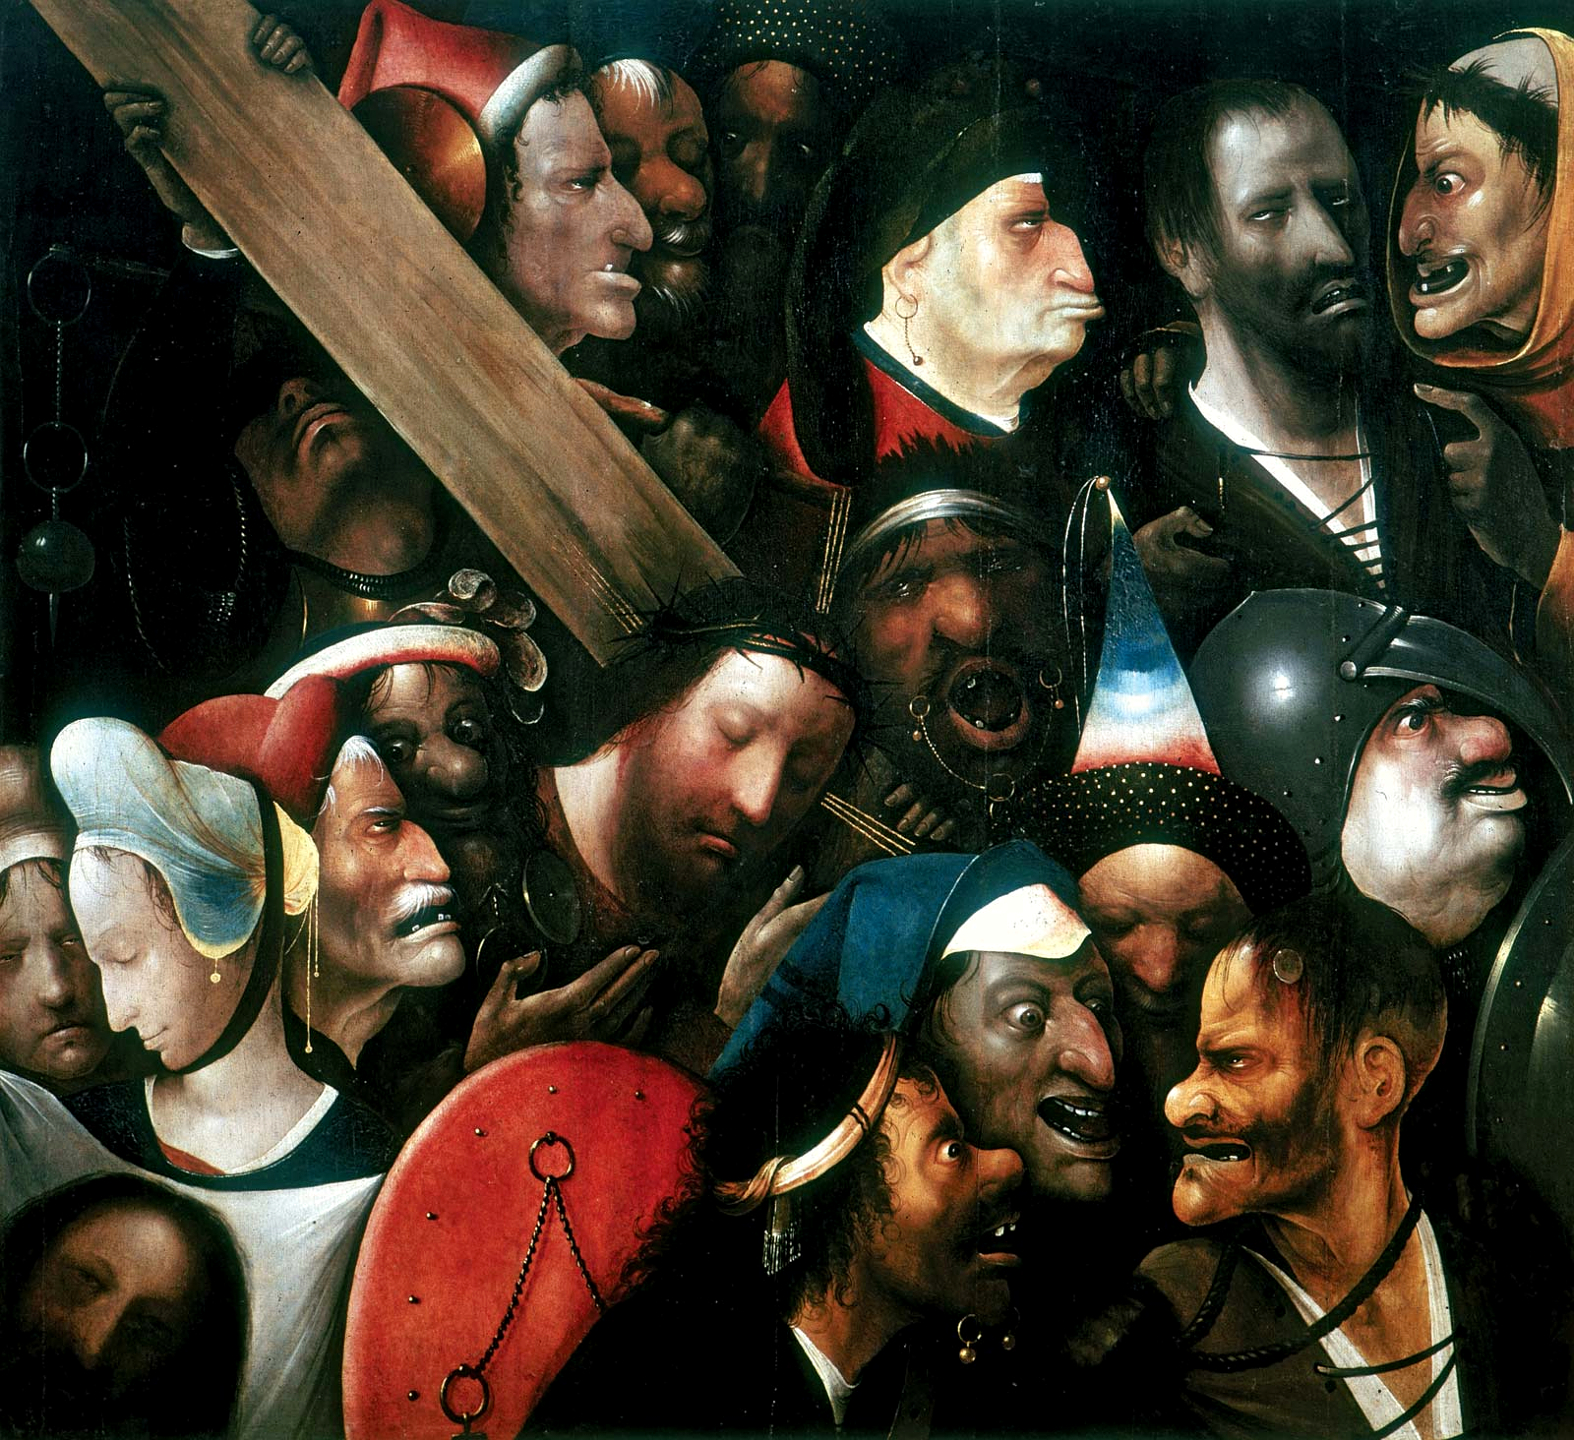 Christ Carrying the Cross (1510).